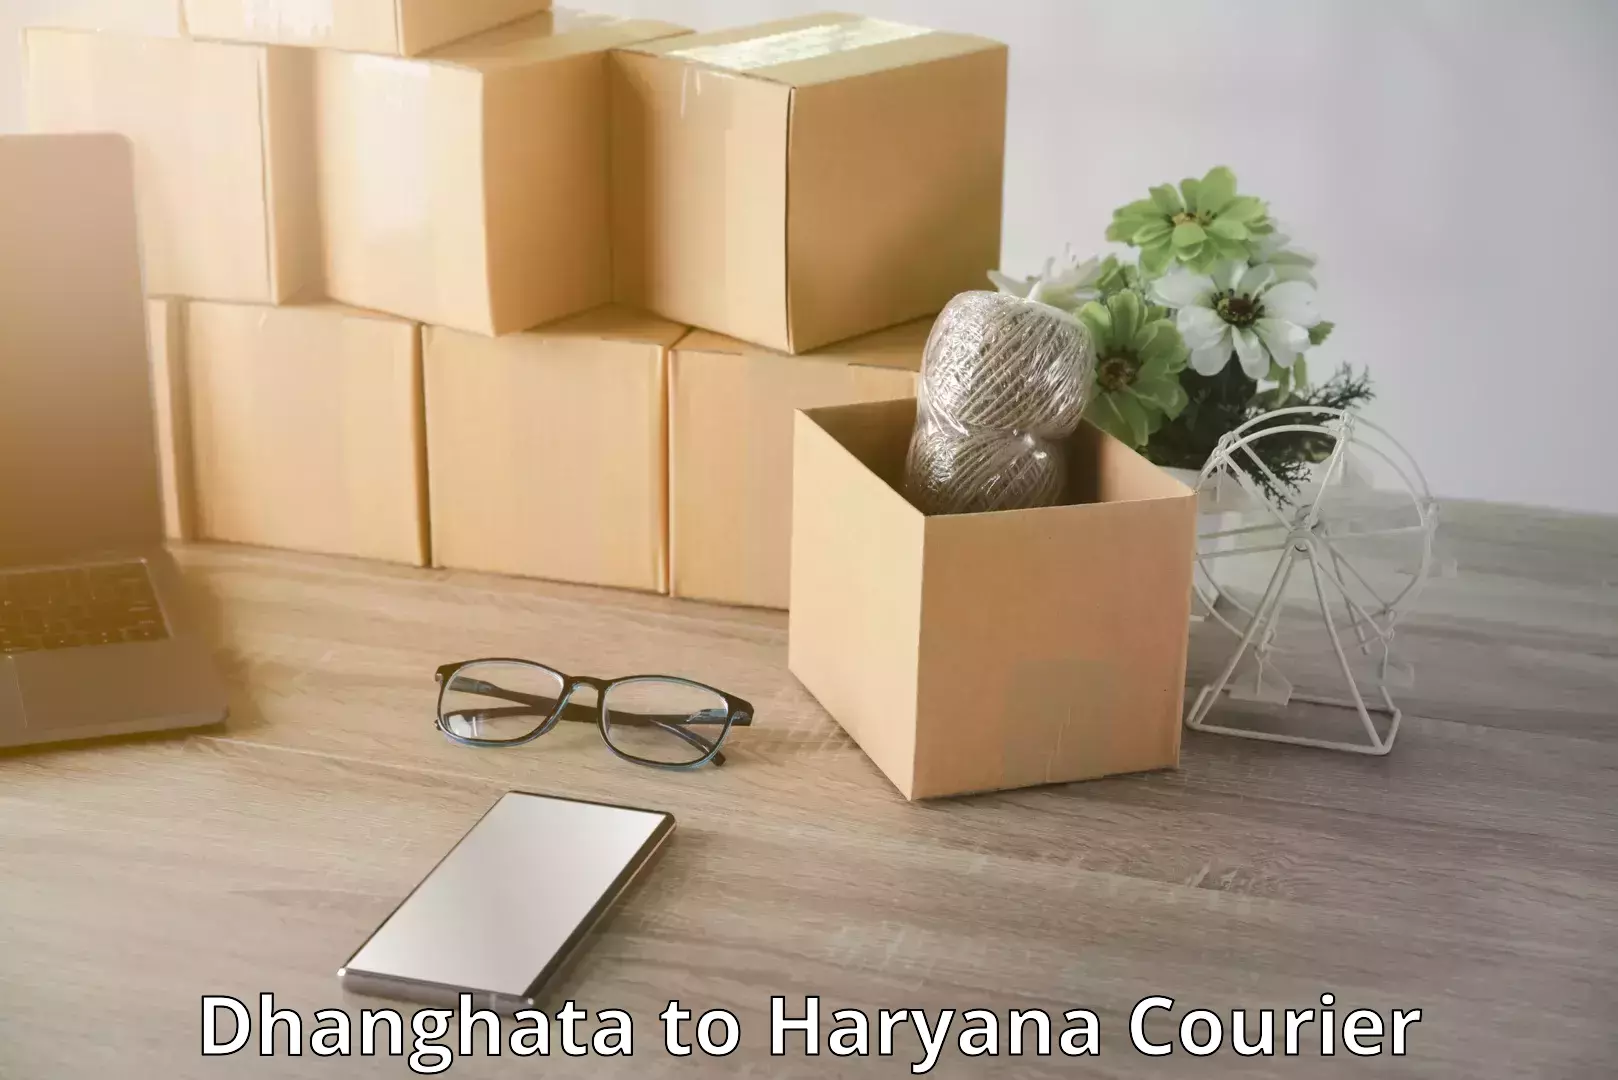 Luggage transport consultancy Dhanghata to Haryana